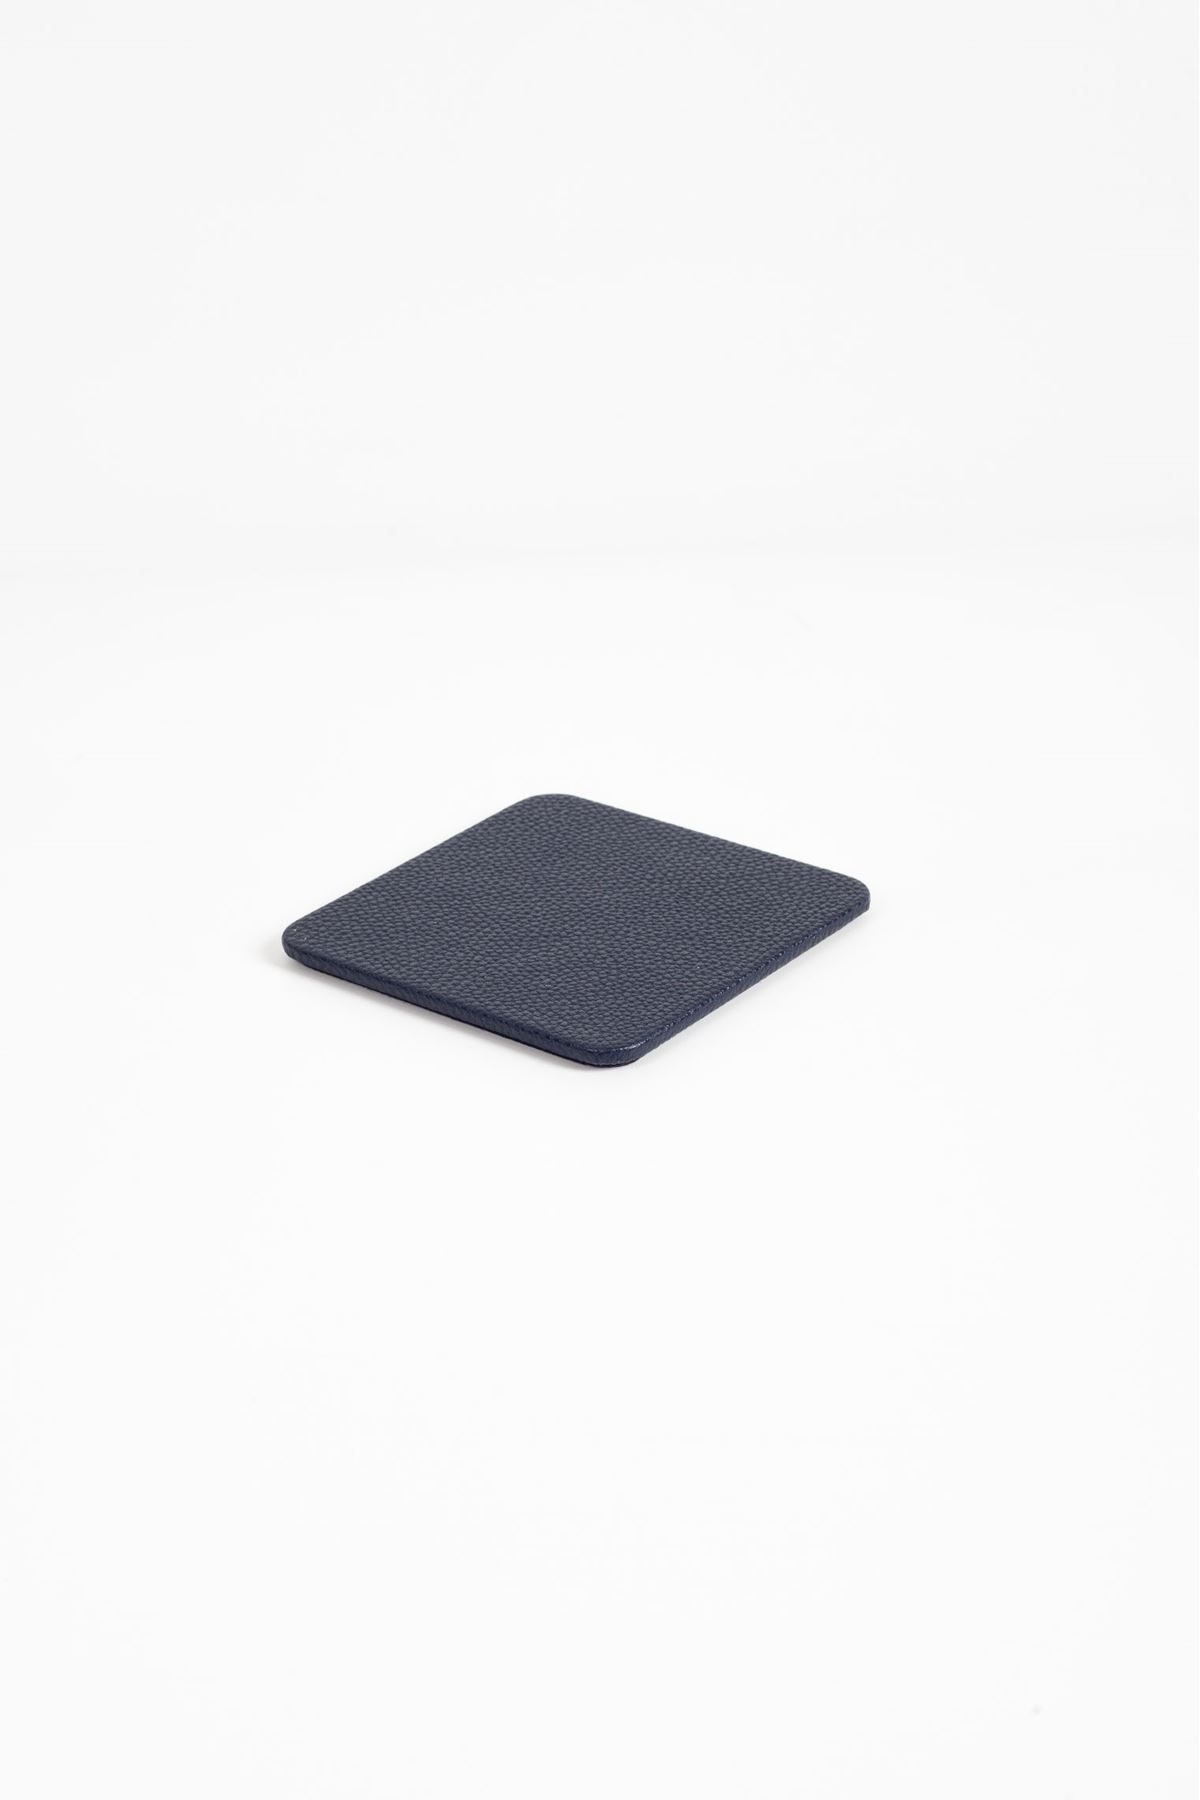 Navy Blue Leather Square Coaster 1 Piece